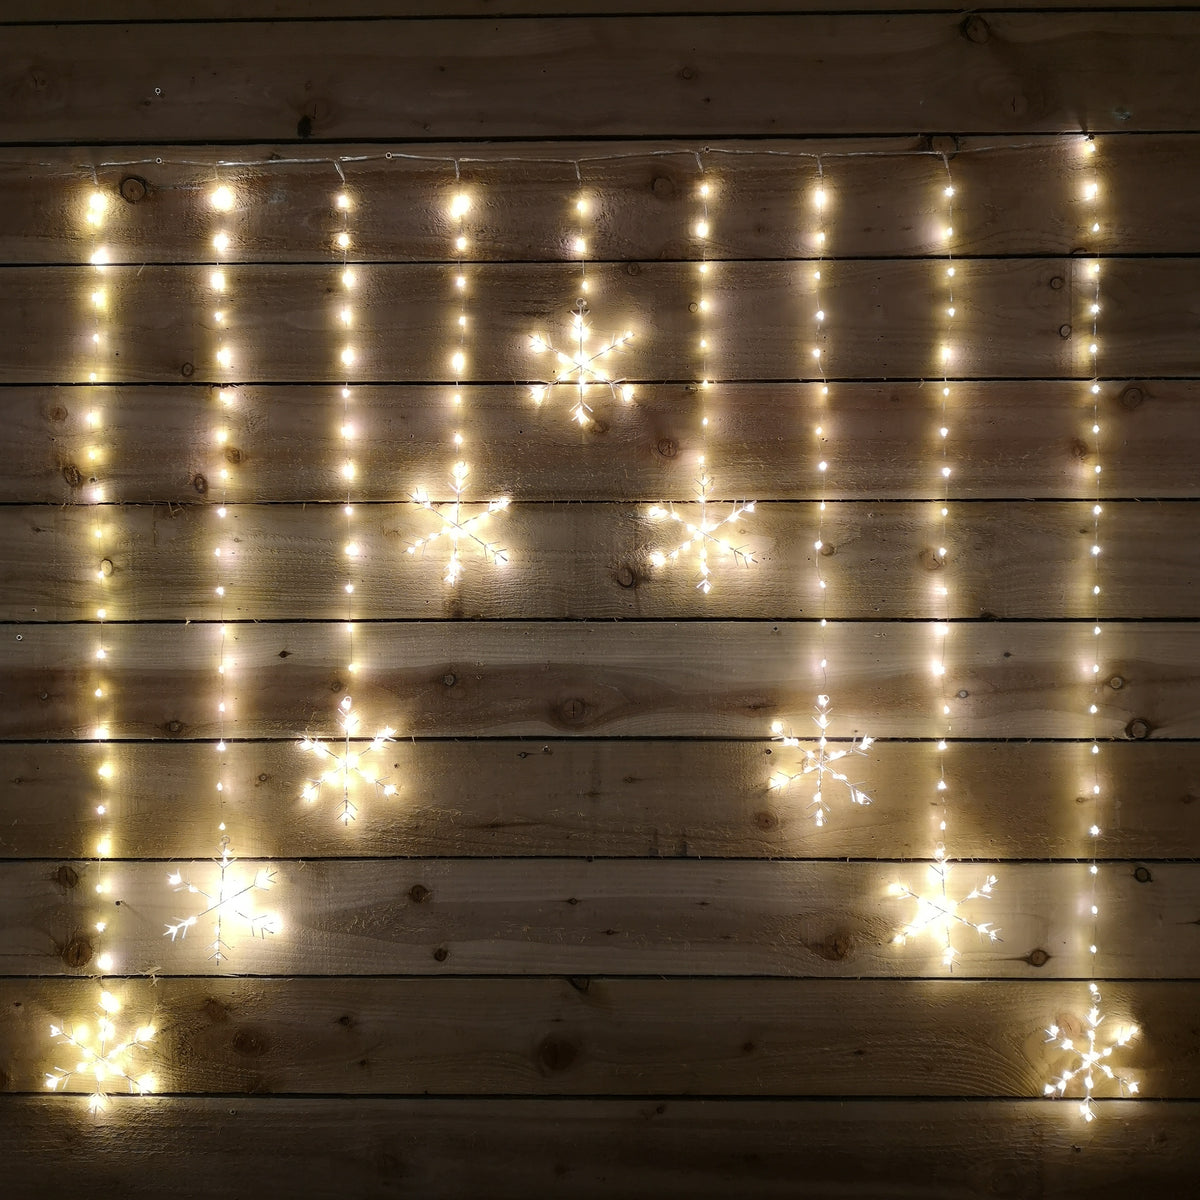 1.2m x 1.2m Premier Christmas Static Snowflake LED Silver Pin Wire V Curtain Lights in Warm White